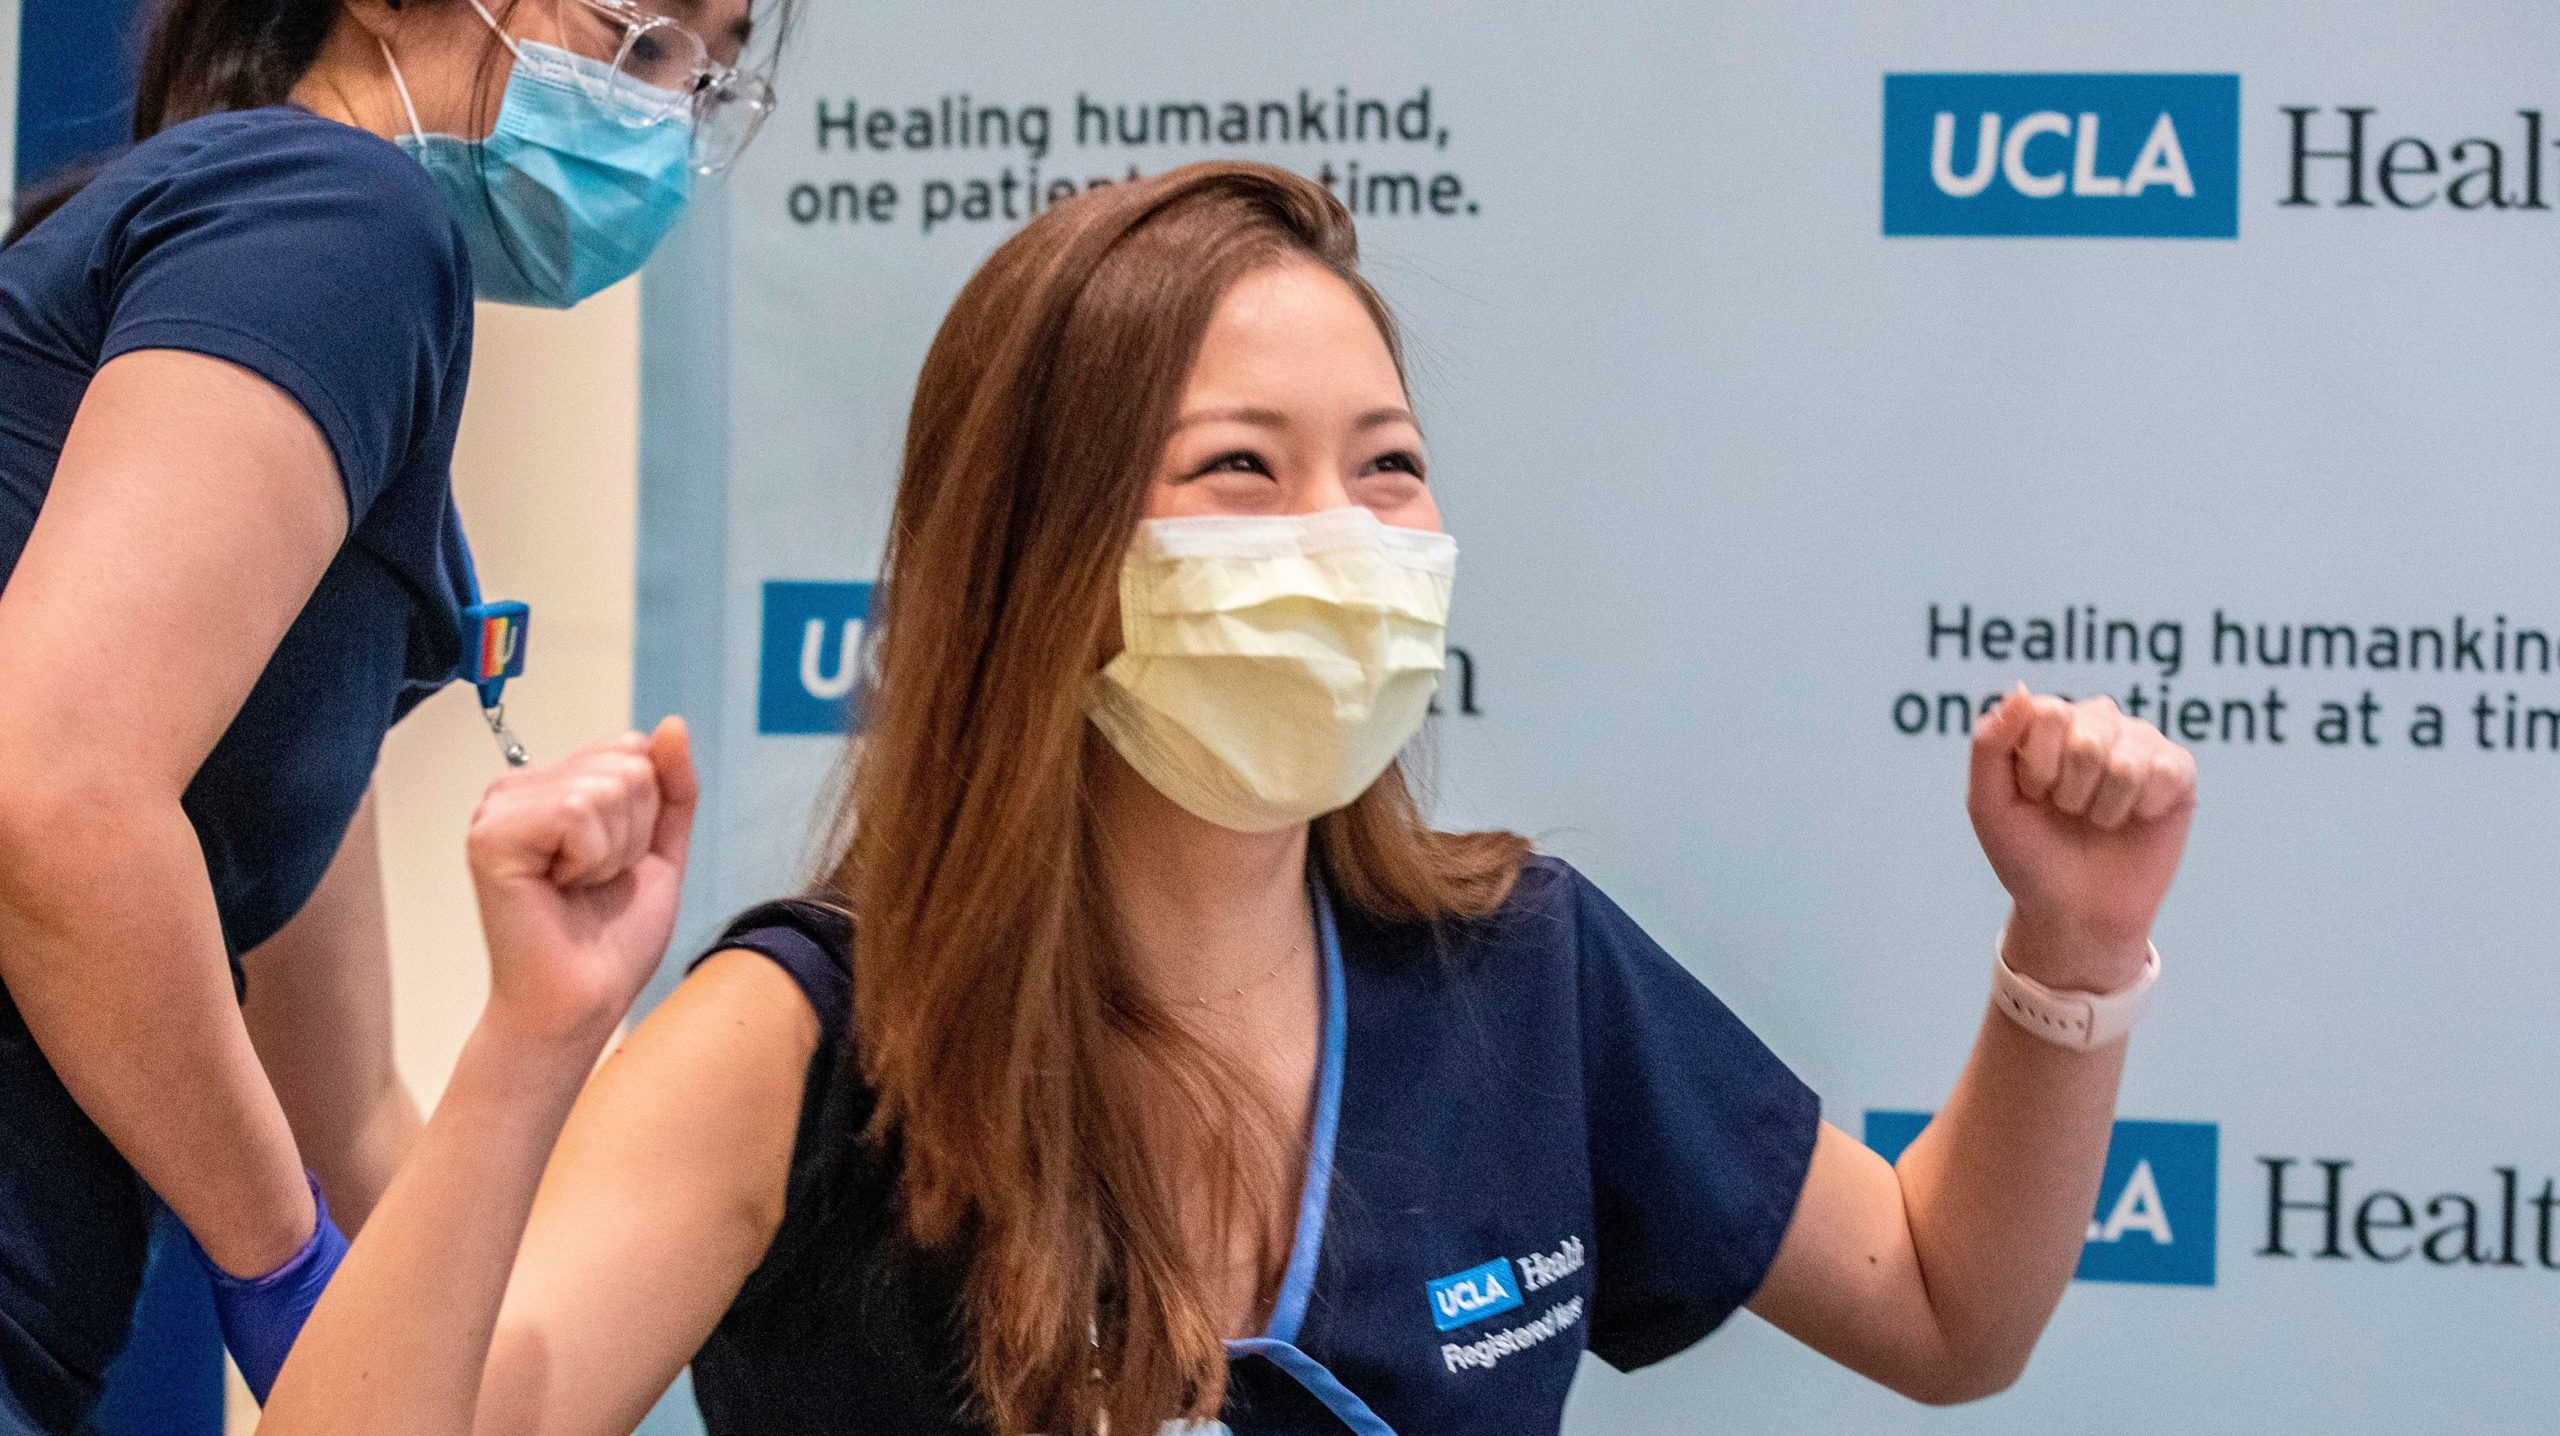 Nurse Nicole Chang celebrates after receiving one of the first injections of the covid-19 vaccine at Ronald Reagan UCLA Medical Centre in Westwood, California on December 16, 2020. (Photo: Brian van der Brug / POOL / AFP, Getty Images)